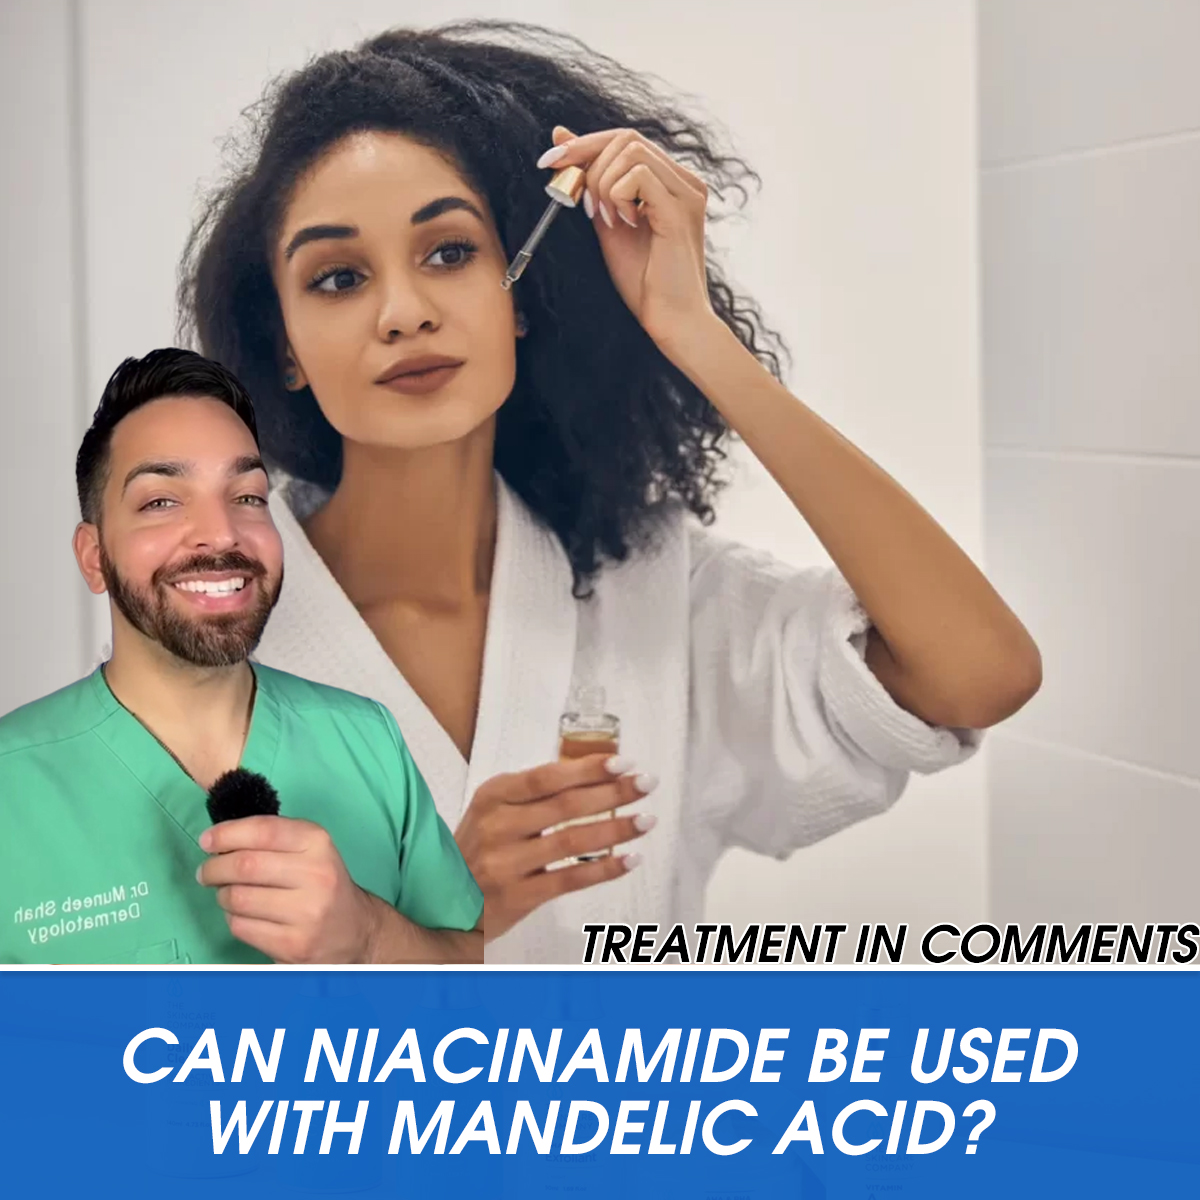 Can Niacinamide Be Used With Mandelic Acid?